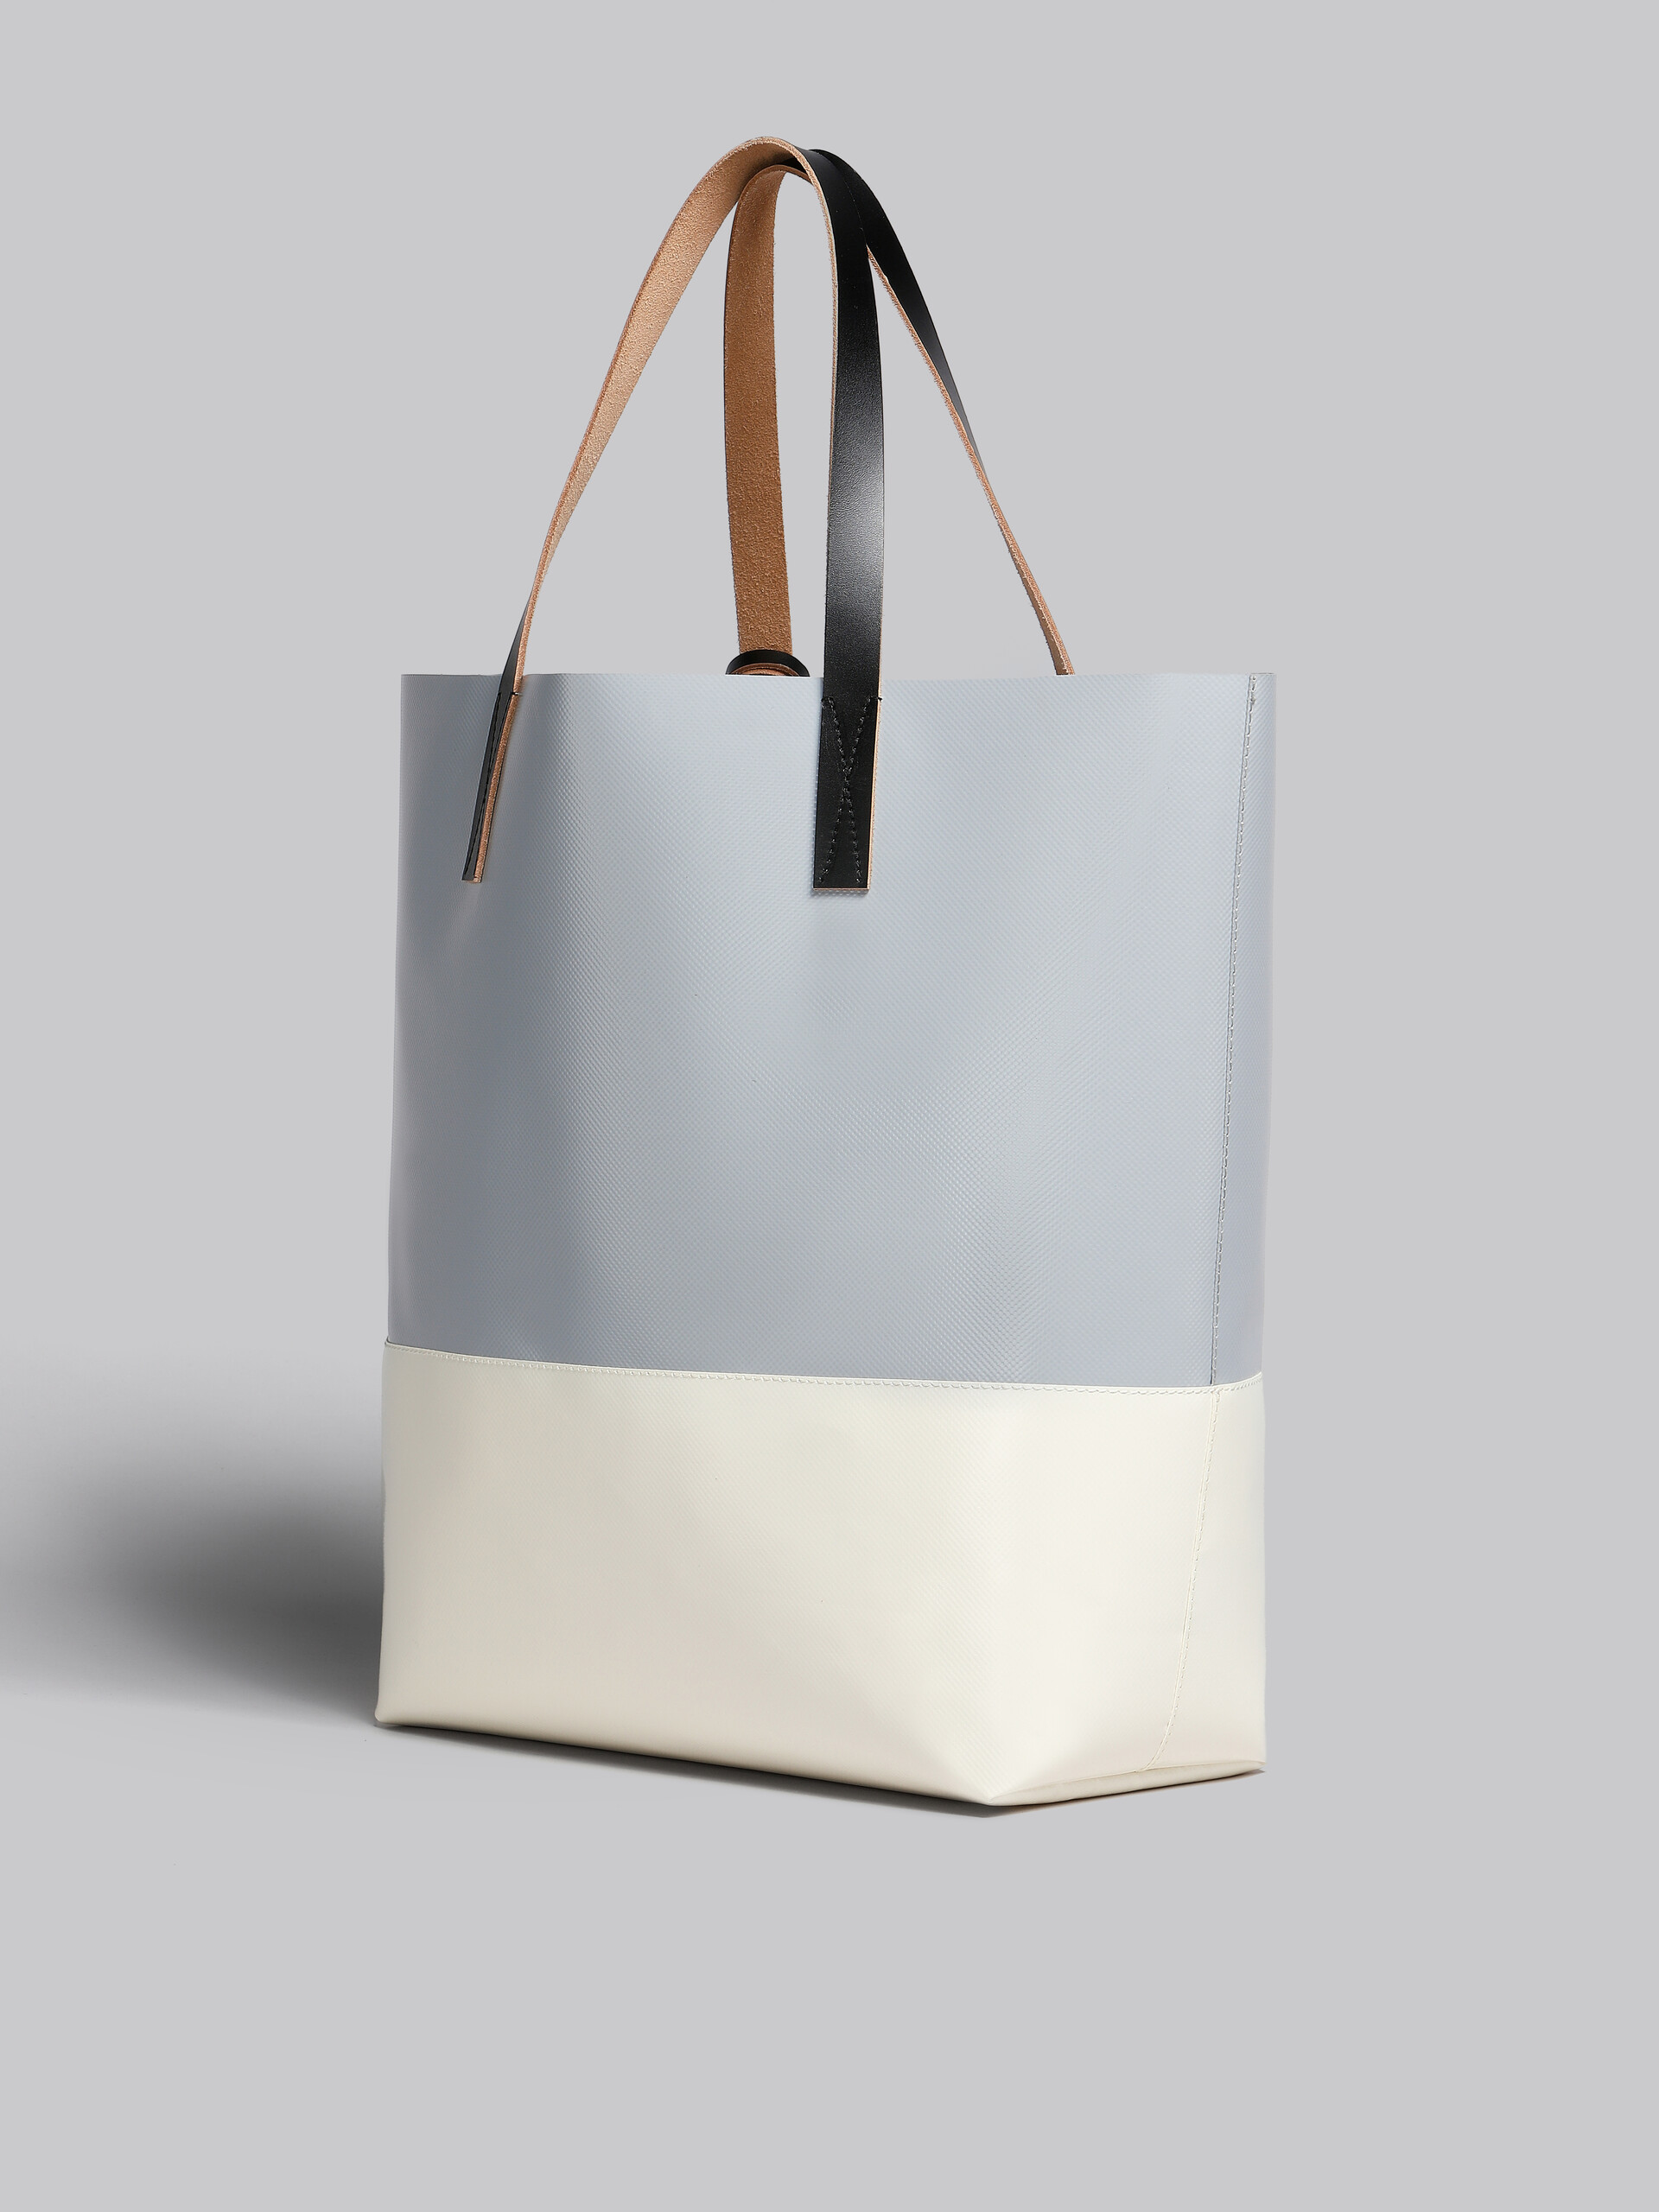 Tribeca shopping bag in blue and black - Shopping Bags - Image 2